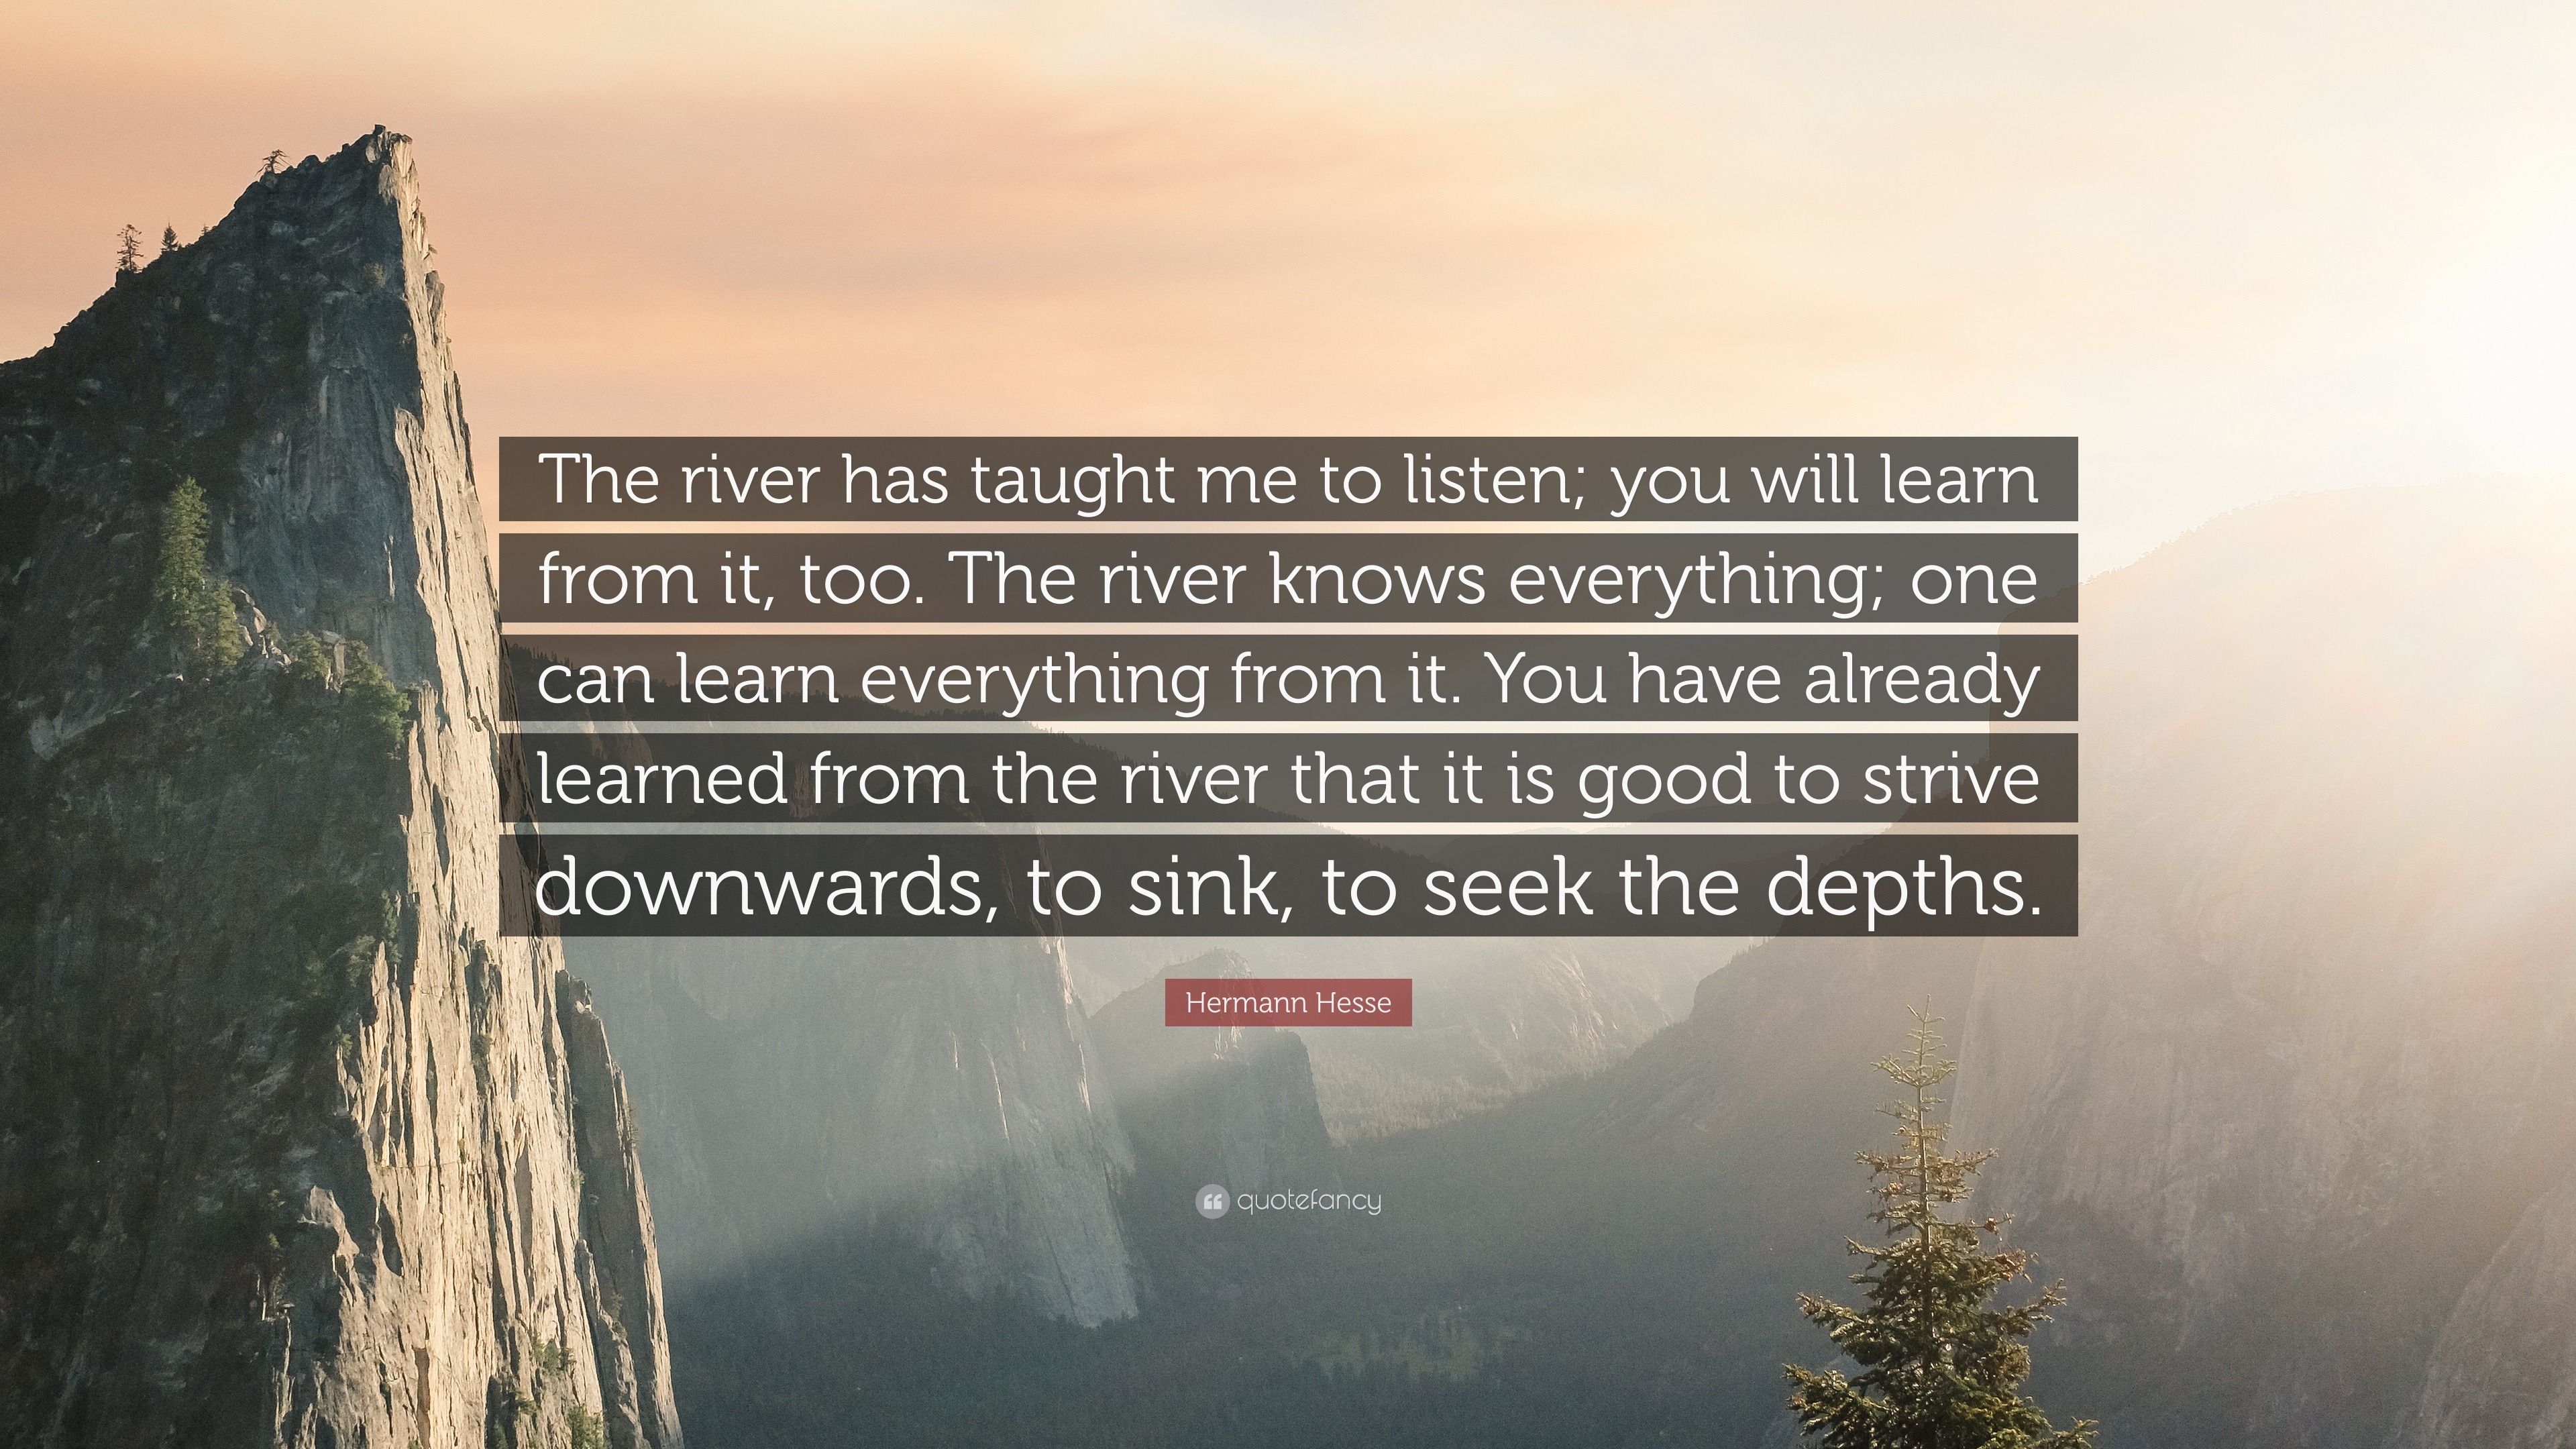 Hermann Hesse Quote: “The river has taught me to listen; you will learn ...